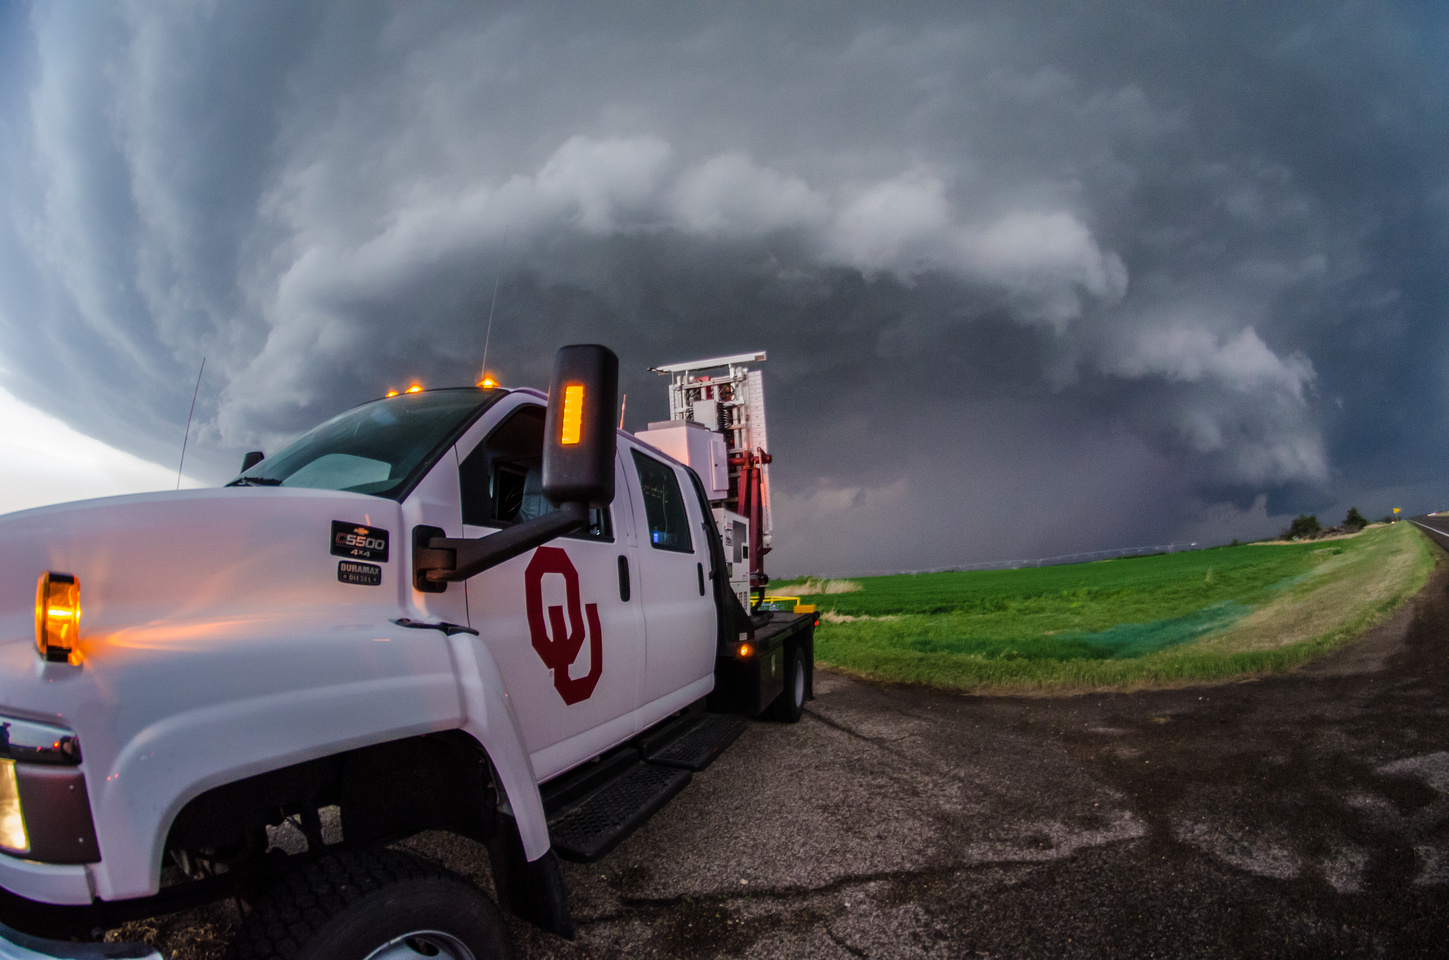 A mobile OU radar truck in the field, with a storm in the background.